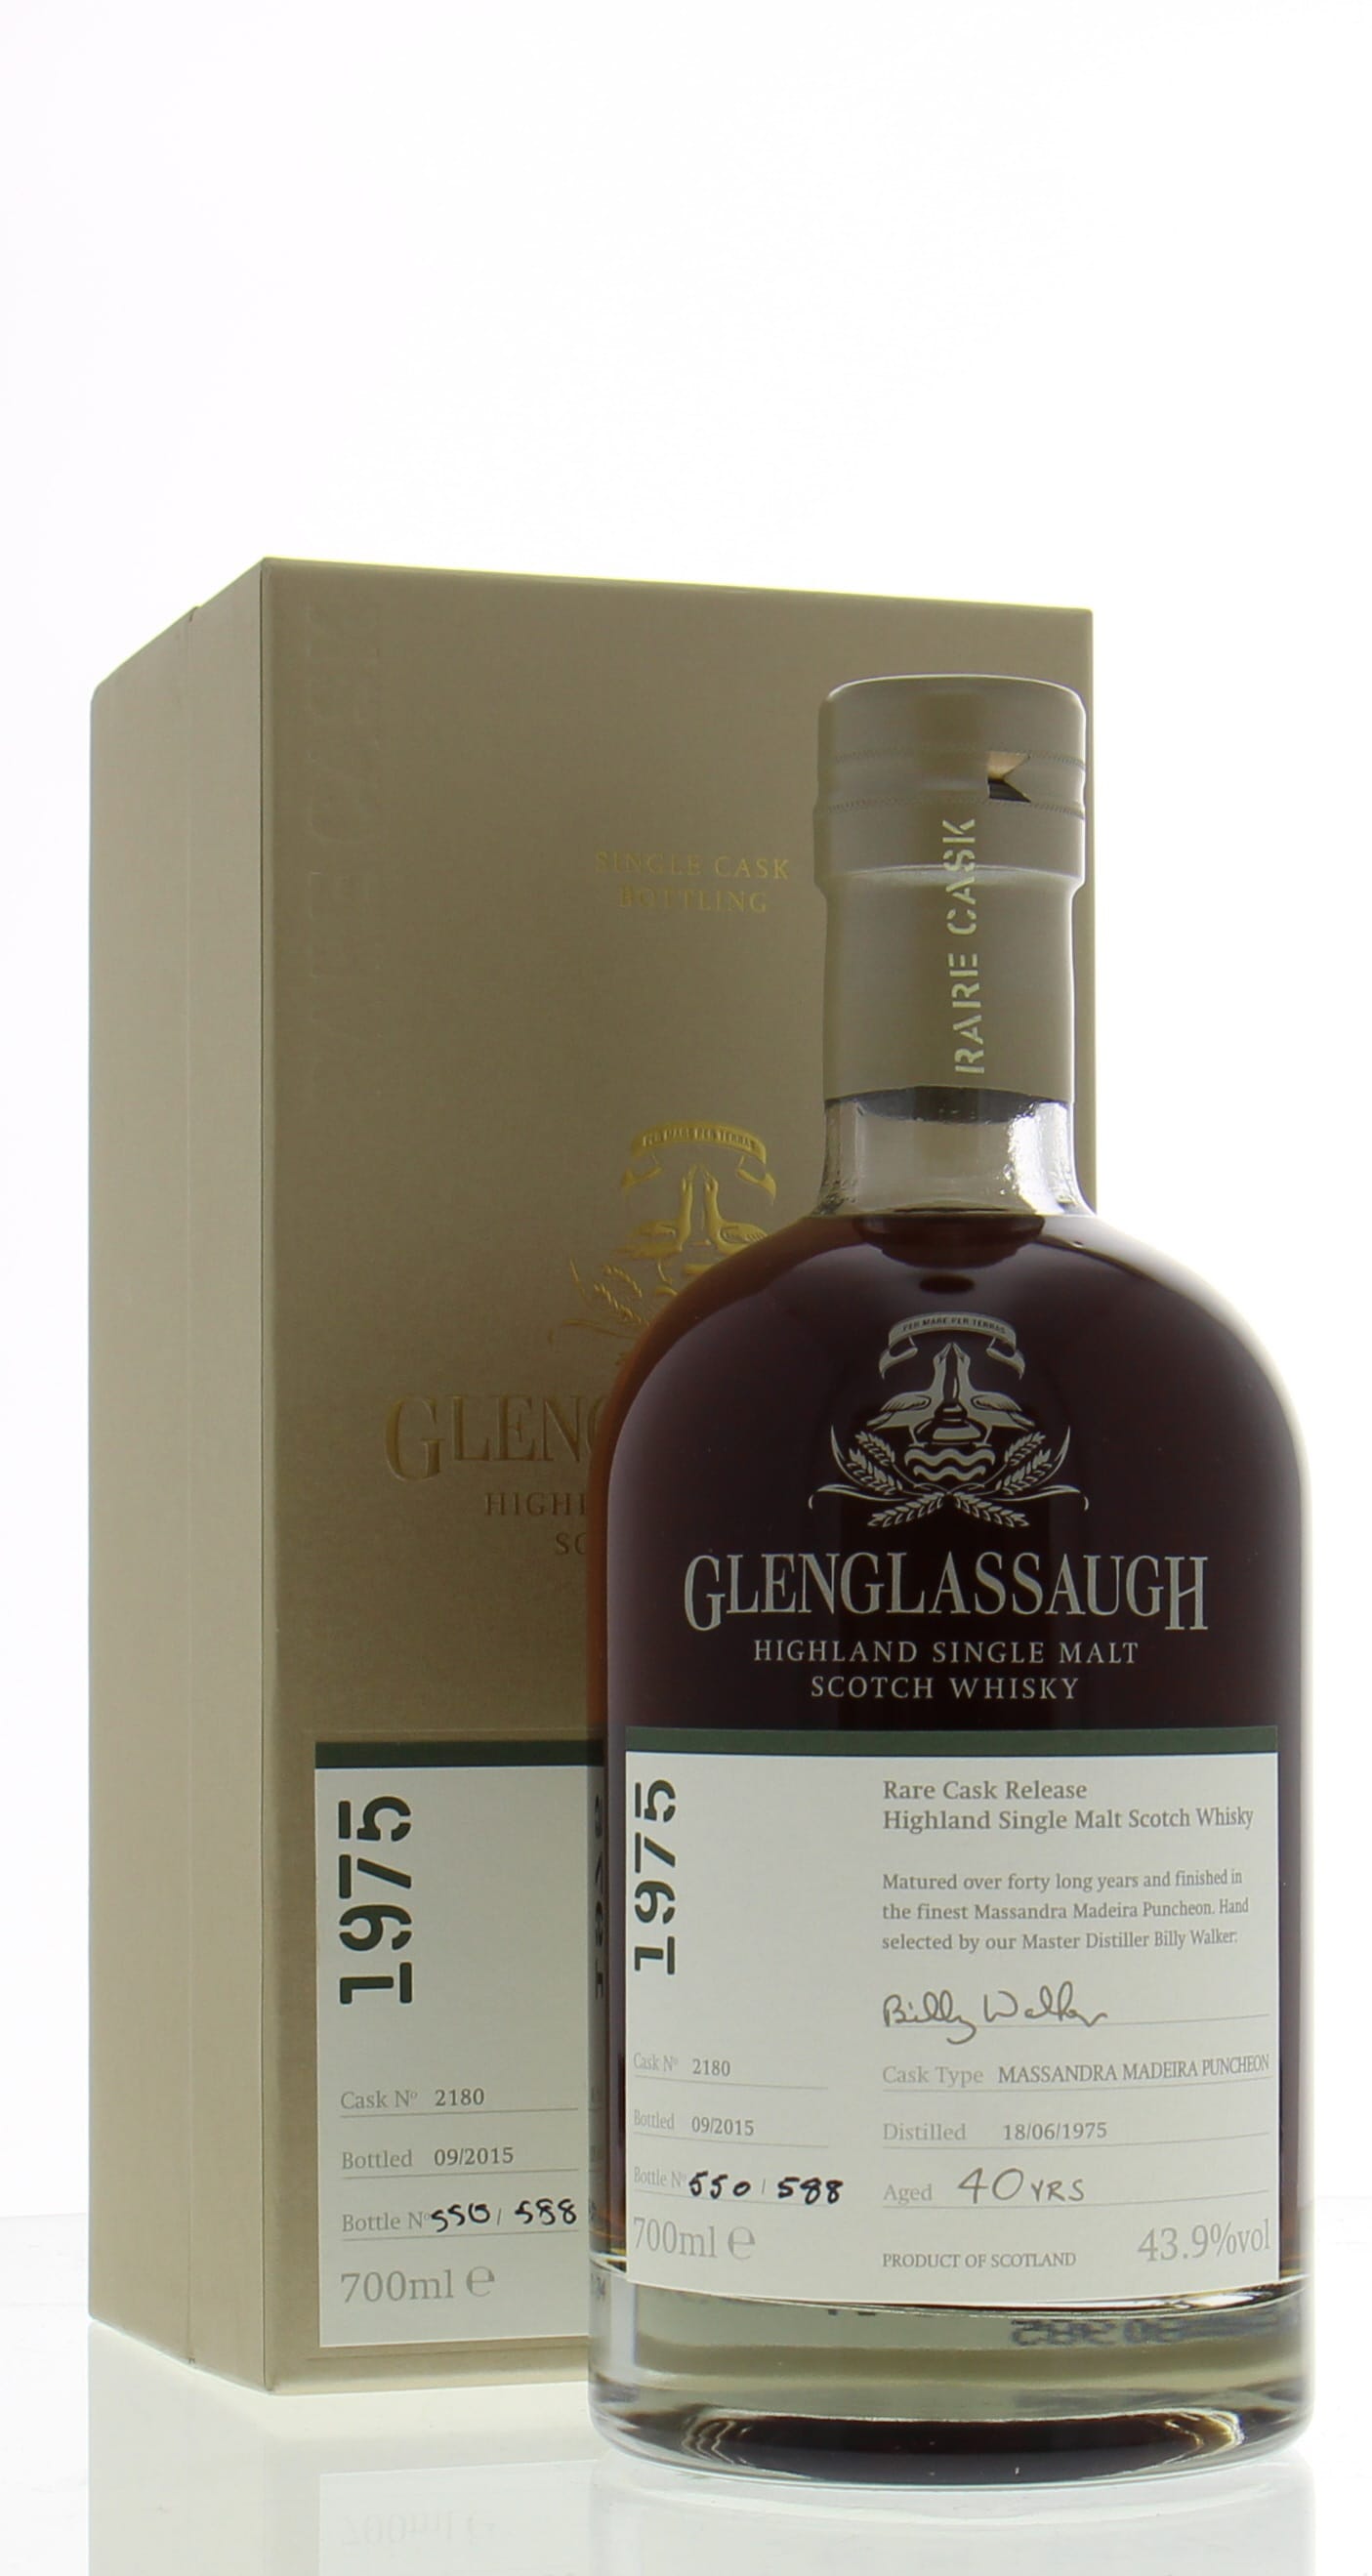 Glenglassaugh - 40 Years Old Rare Cask Release Batch 2 Cask 2180 43,9% 1975 Perfect